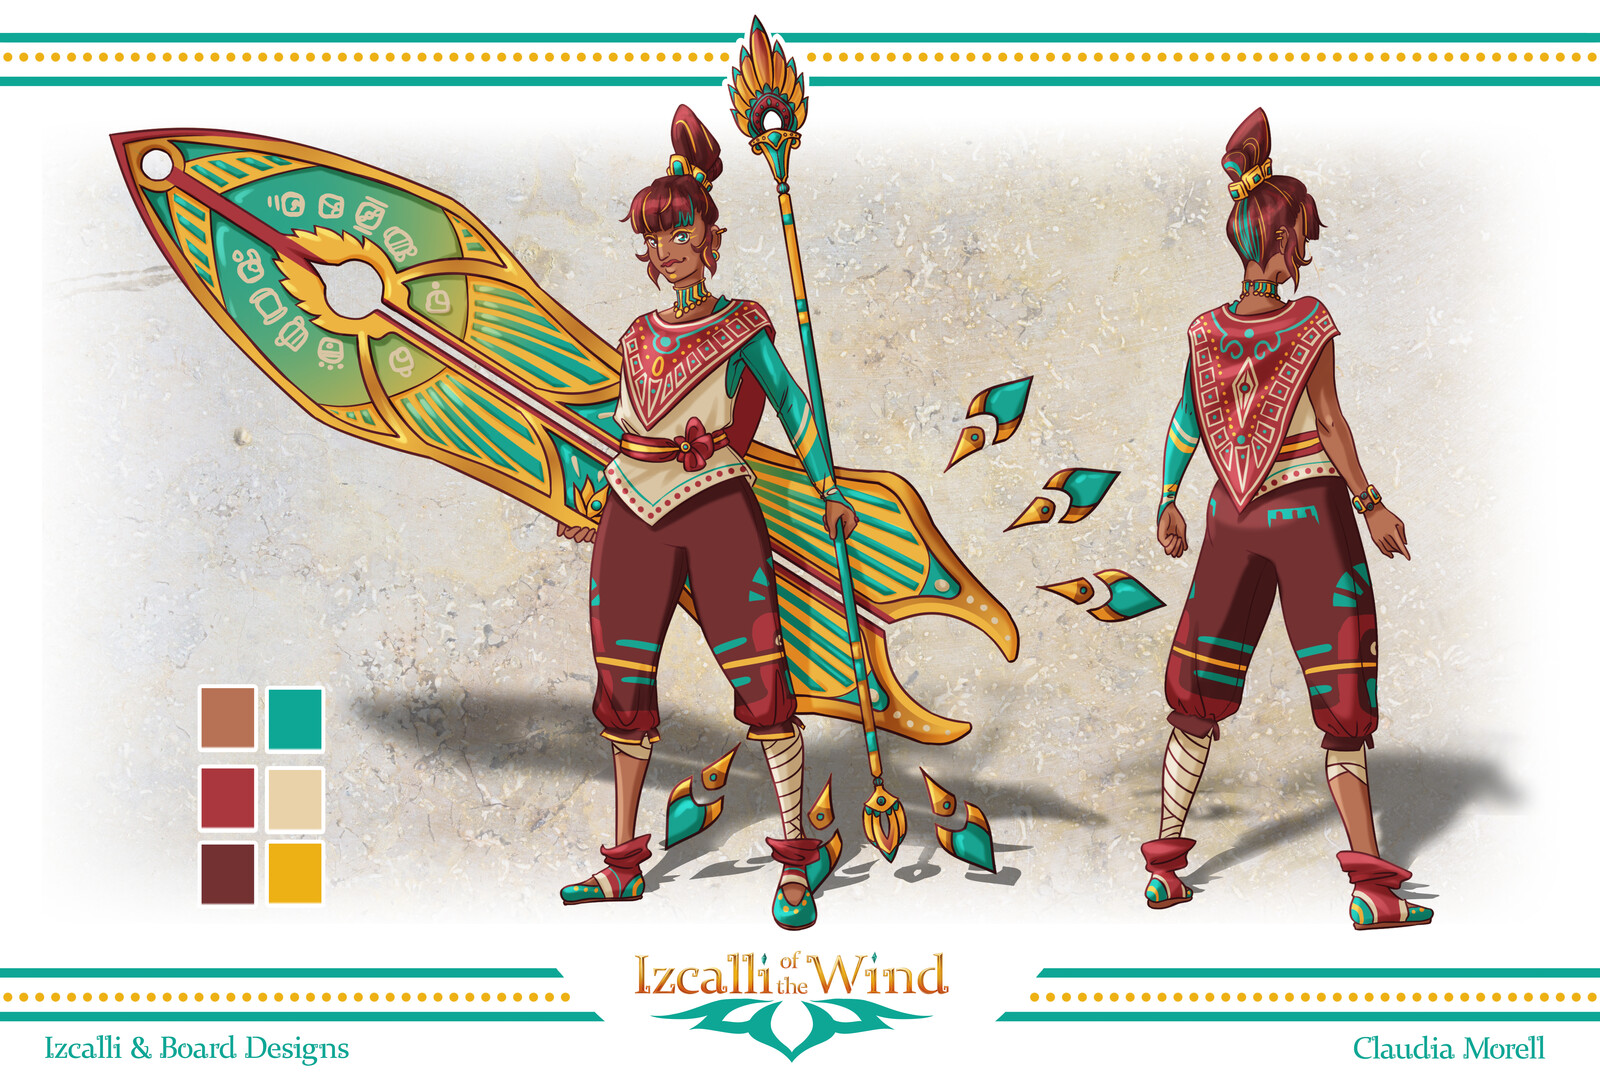 Finished concept of Izcalli. Process of this design can be seen in the description. 